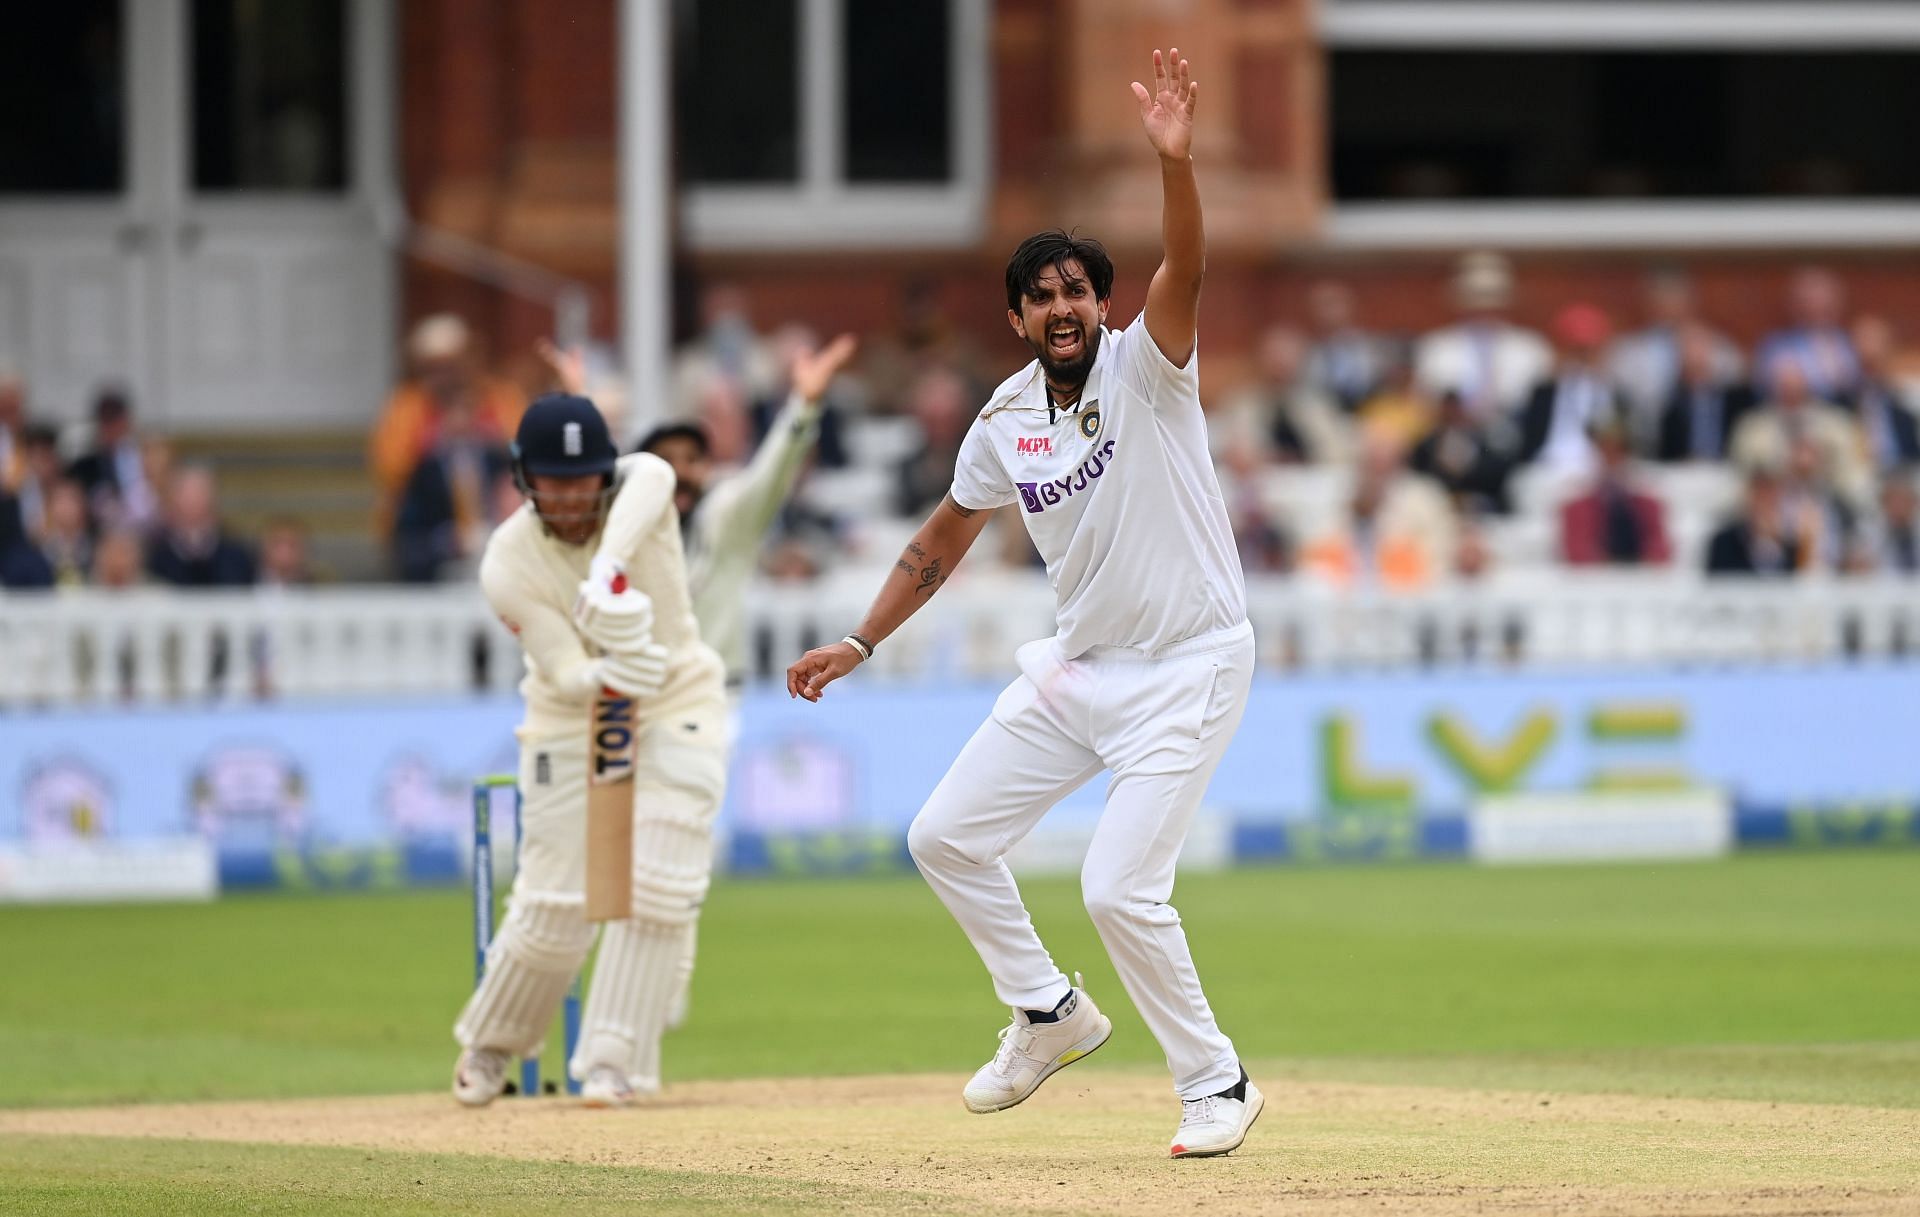 “After playing 100 Test matches, you expect a player to take at least 3 wickets apiece in domestic cricket” – Nikhil Chopra on Ishant Sharma’s future 